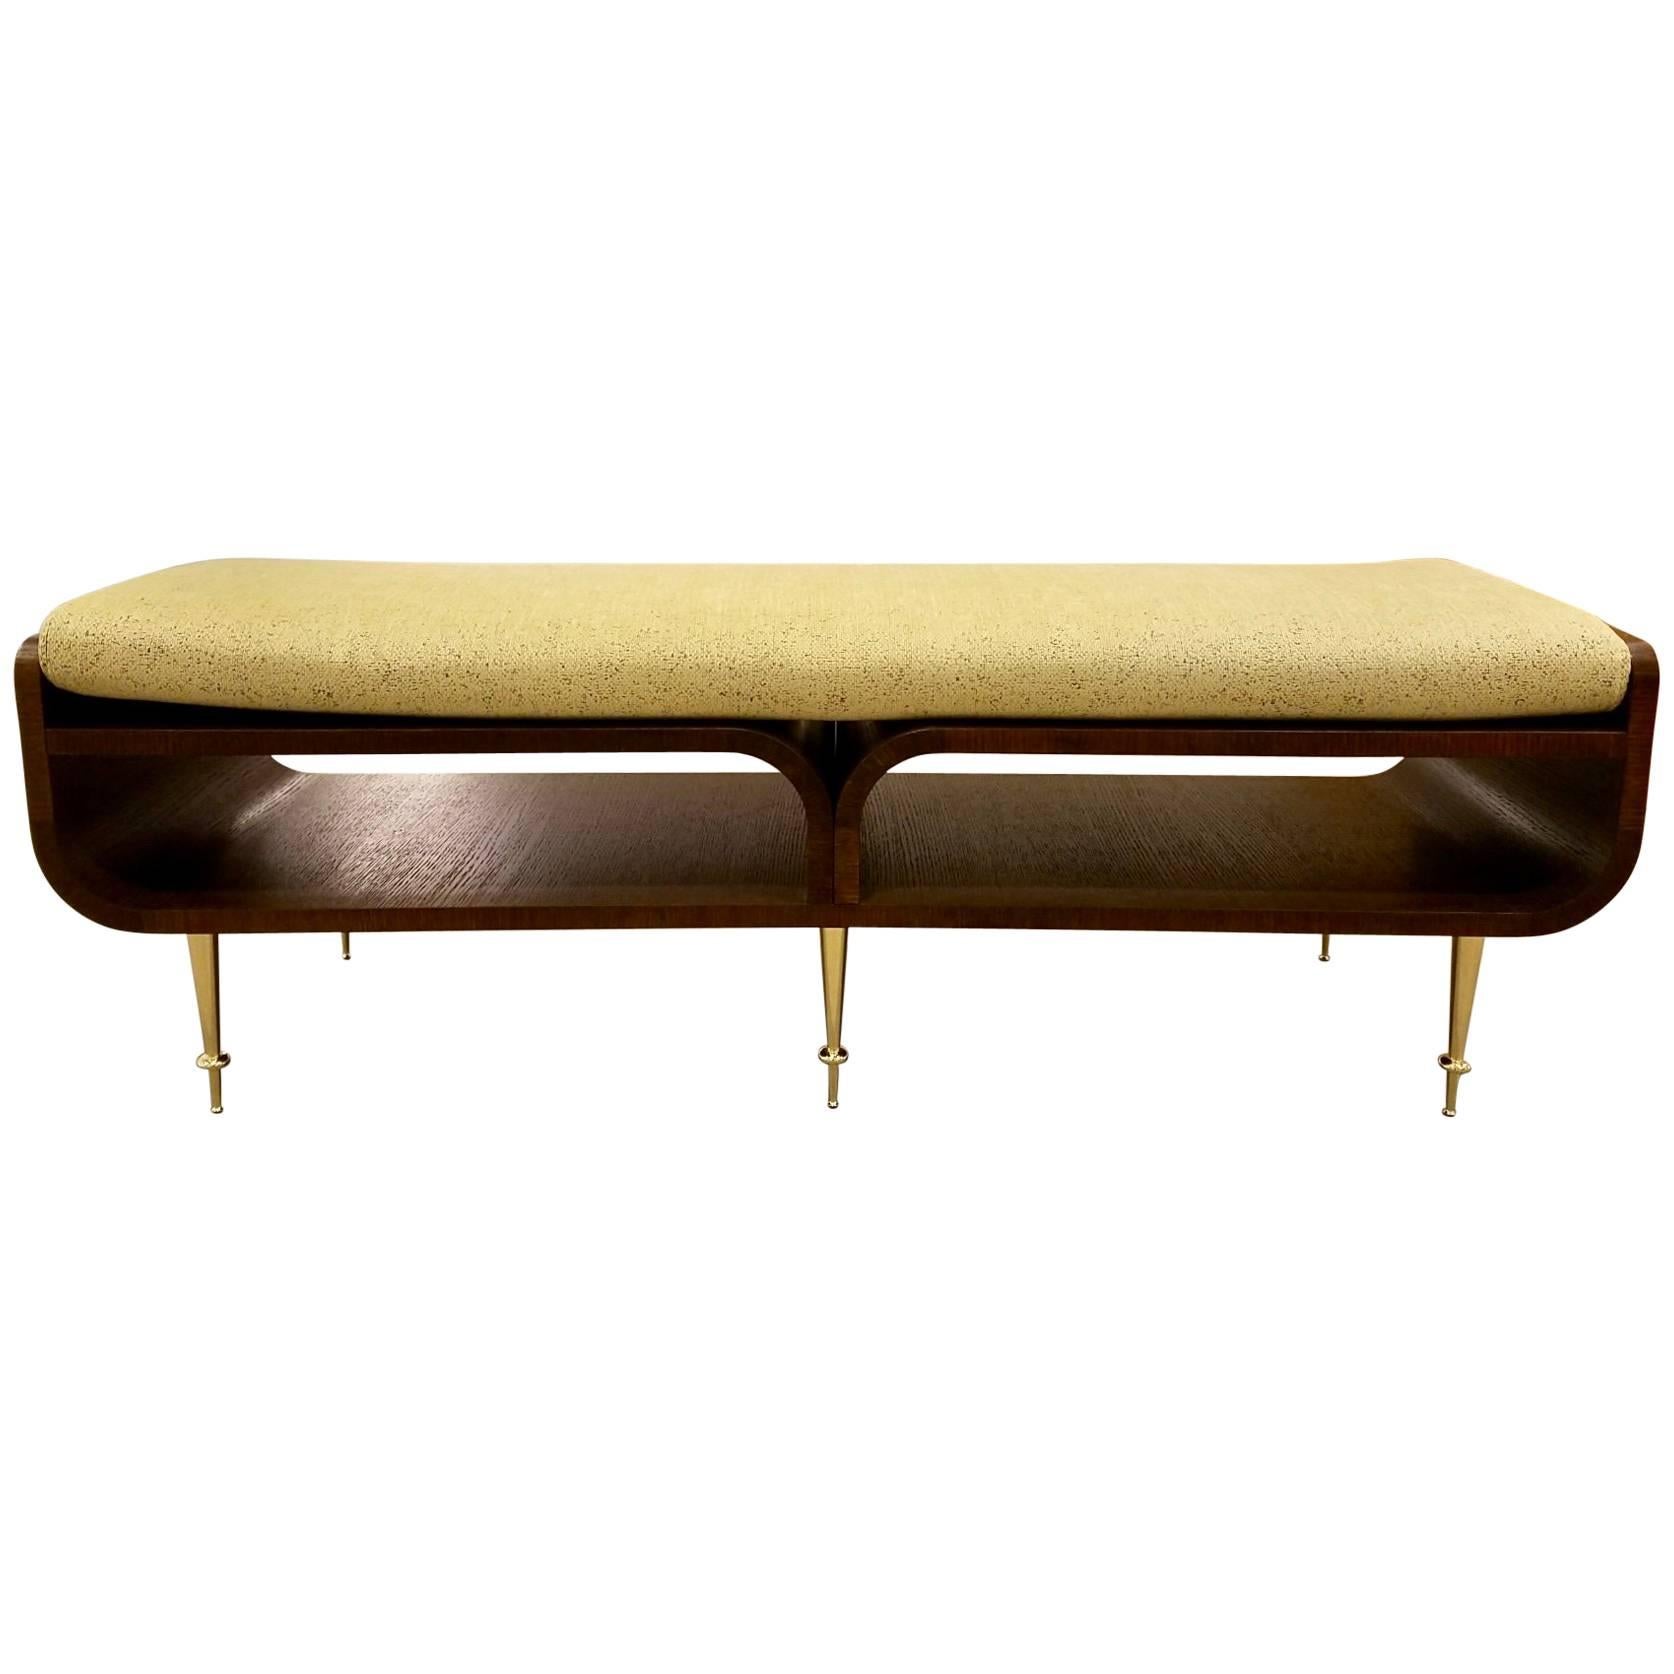 Limited Edition Italian Two-Tier Brown Wood Bench With Brass Legs